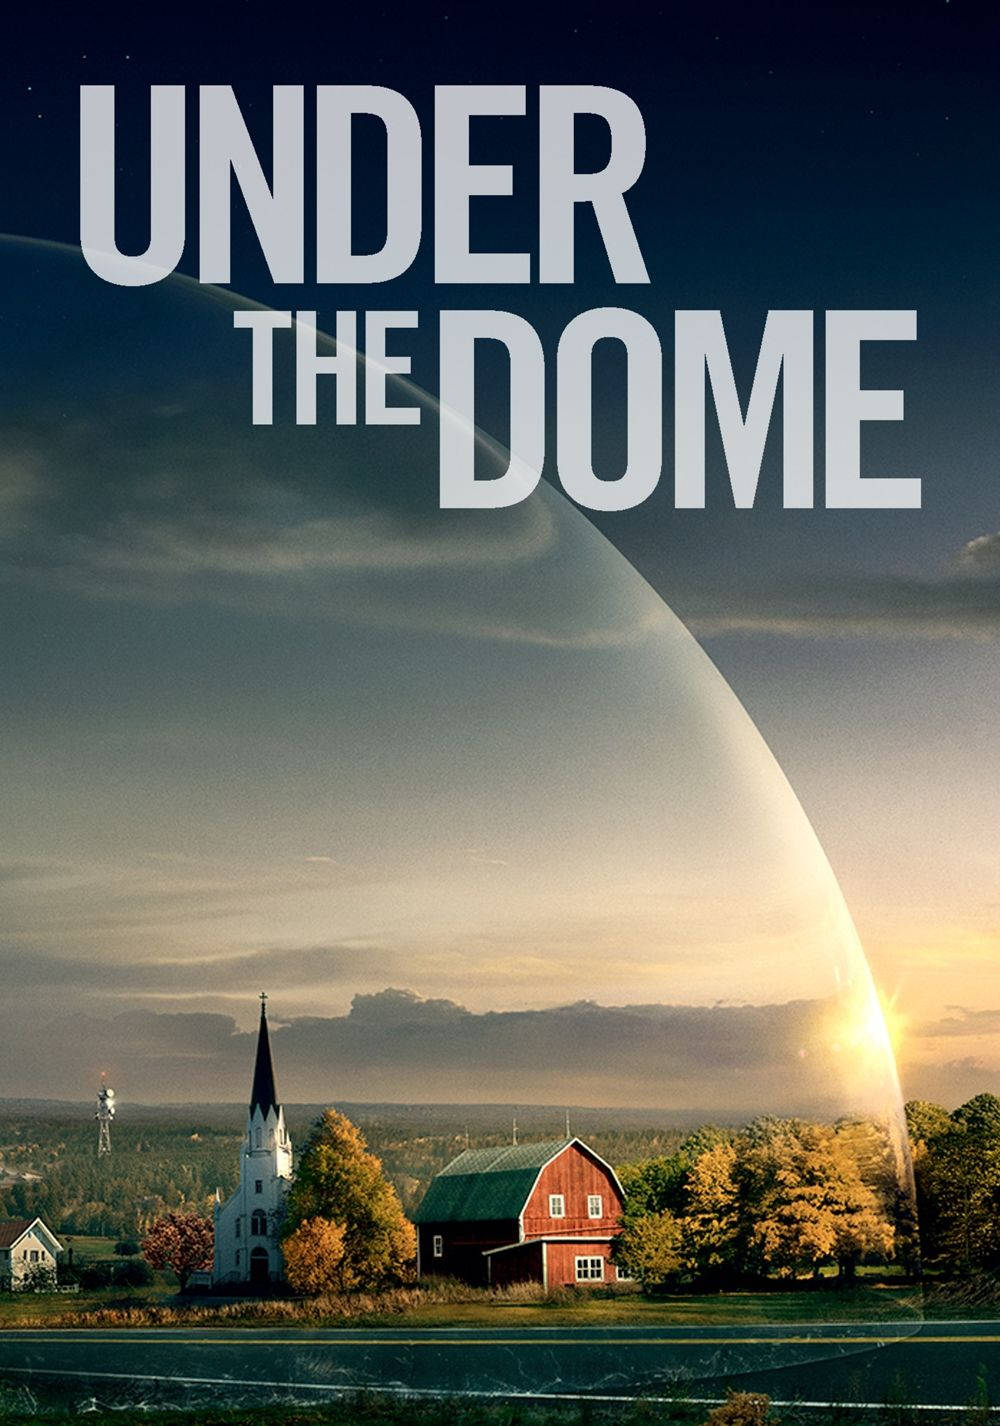 Under The Dome Promo Poster Background